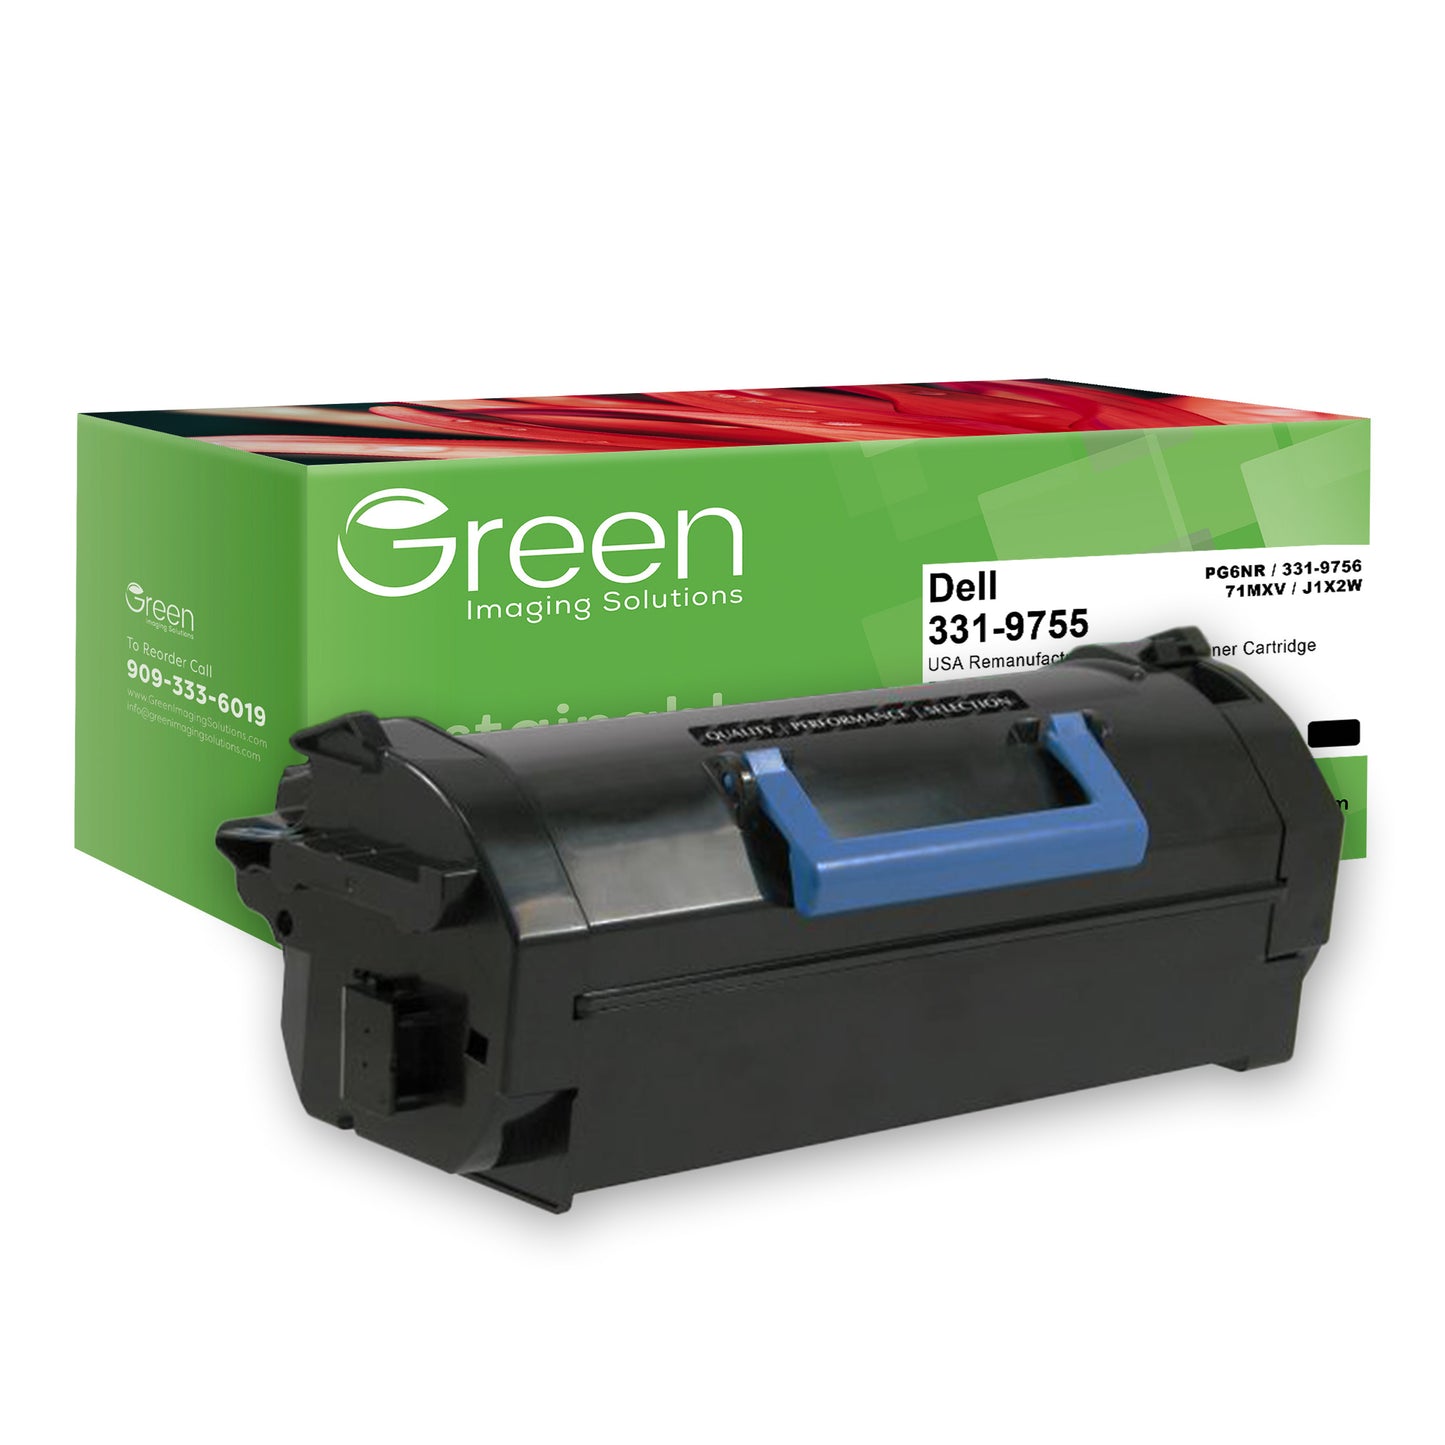 Green Imaging Solutions USA Remanufactured High Yield Toner Cartridge for Dell B5460/B5465